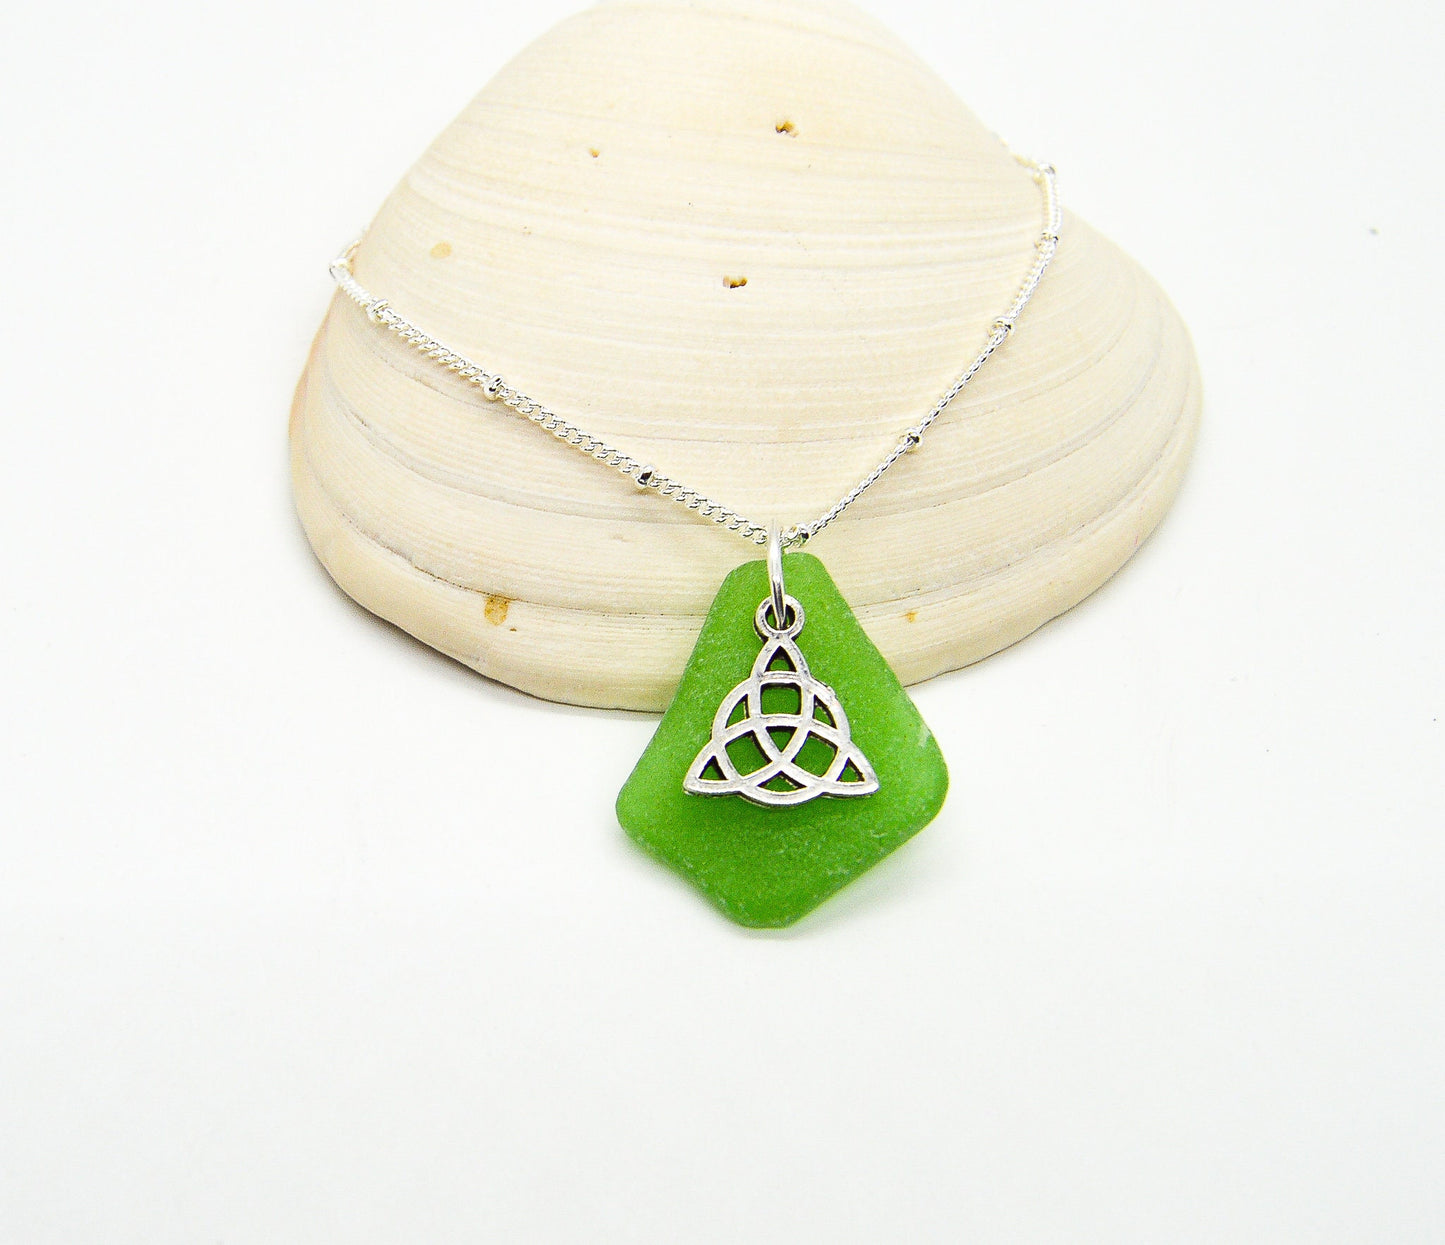 Sea Glass Necklace/St. Patrick's Day Necklace/Celtic Knot Necklace/Genuine Sea Glass/Irish Necklace/Good Luck Charm/Made to Order